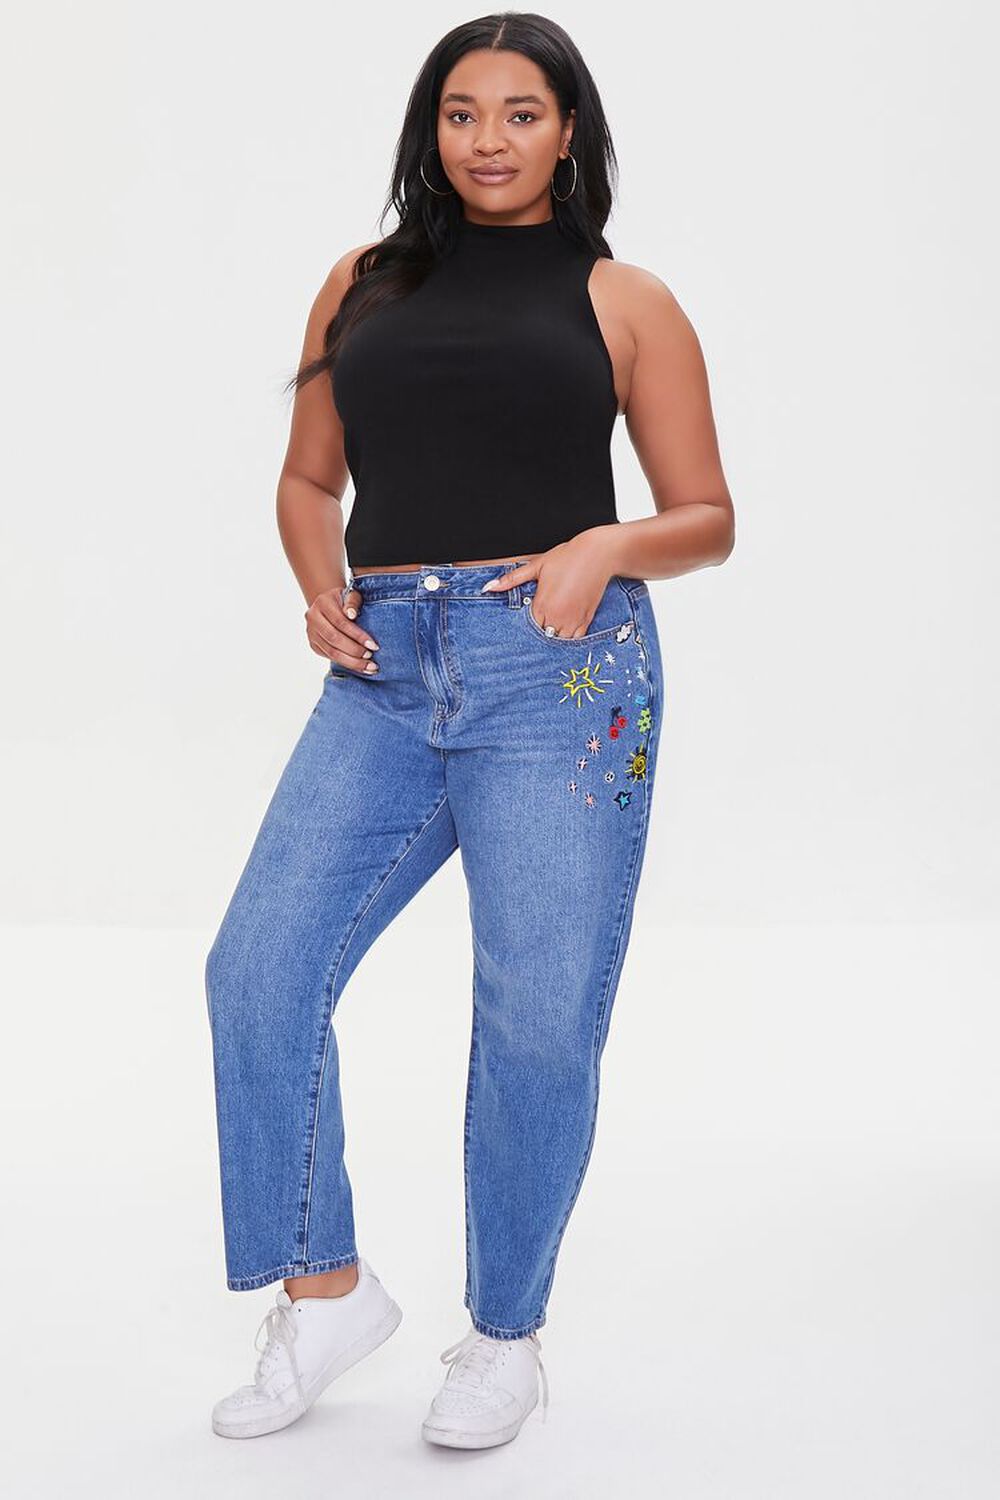 Forever 21 Plus Size High-Waisted Chambray Pants  Plus size clothing  stores, Chambray pants, Womens fashion casual chic